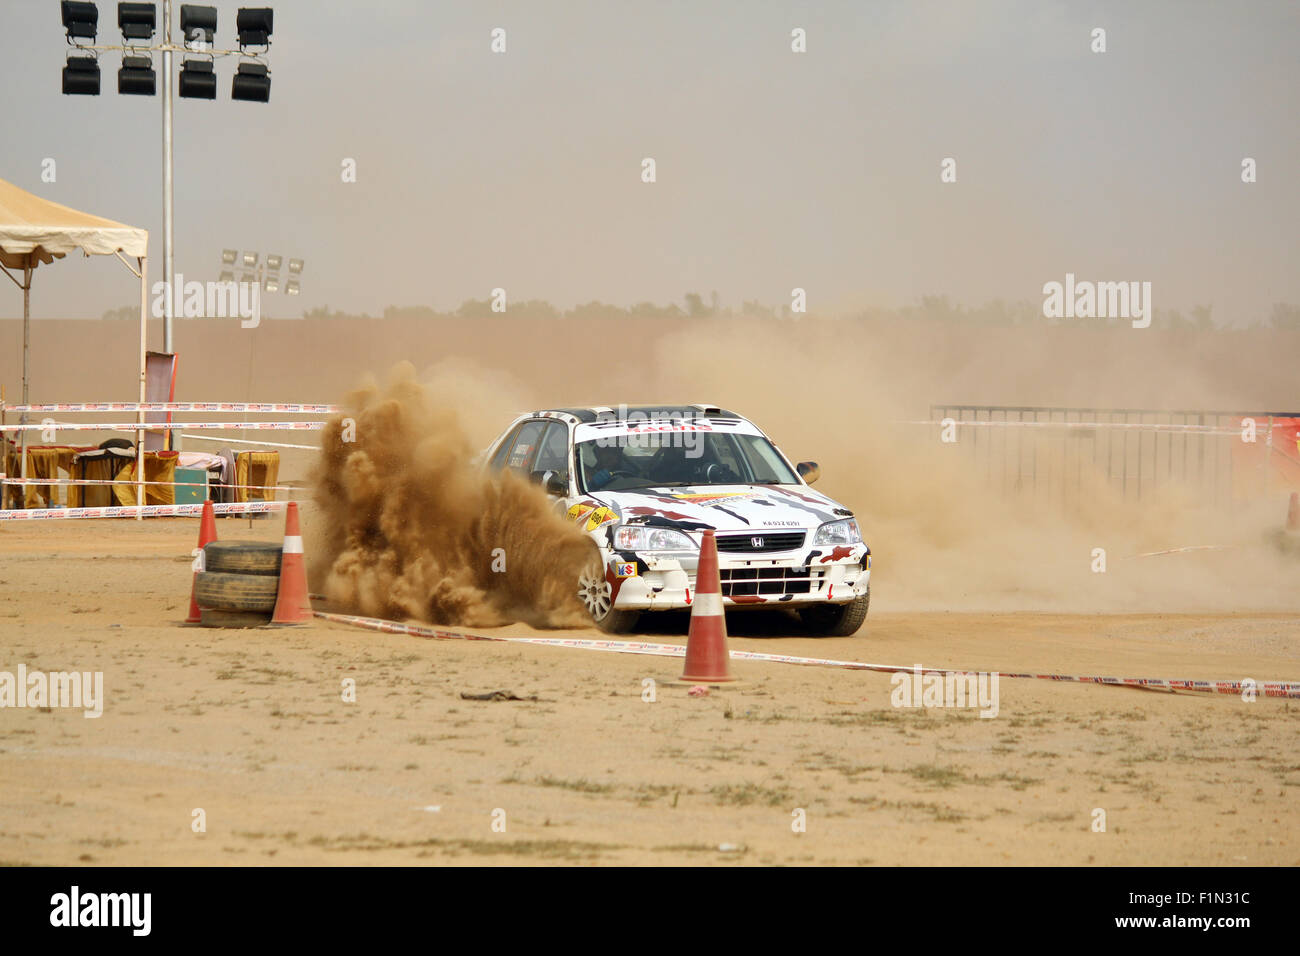 Cars drifting in mud at the Autocross 2014, bangalore, India Stock Photo